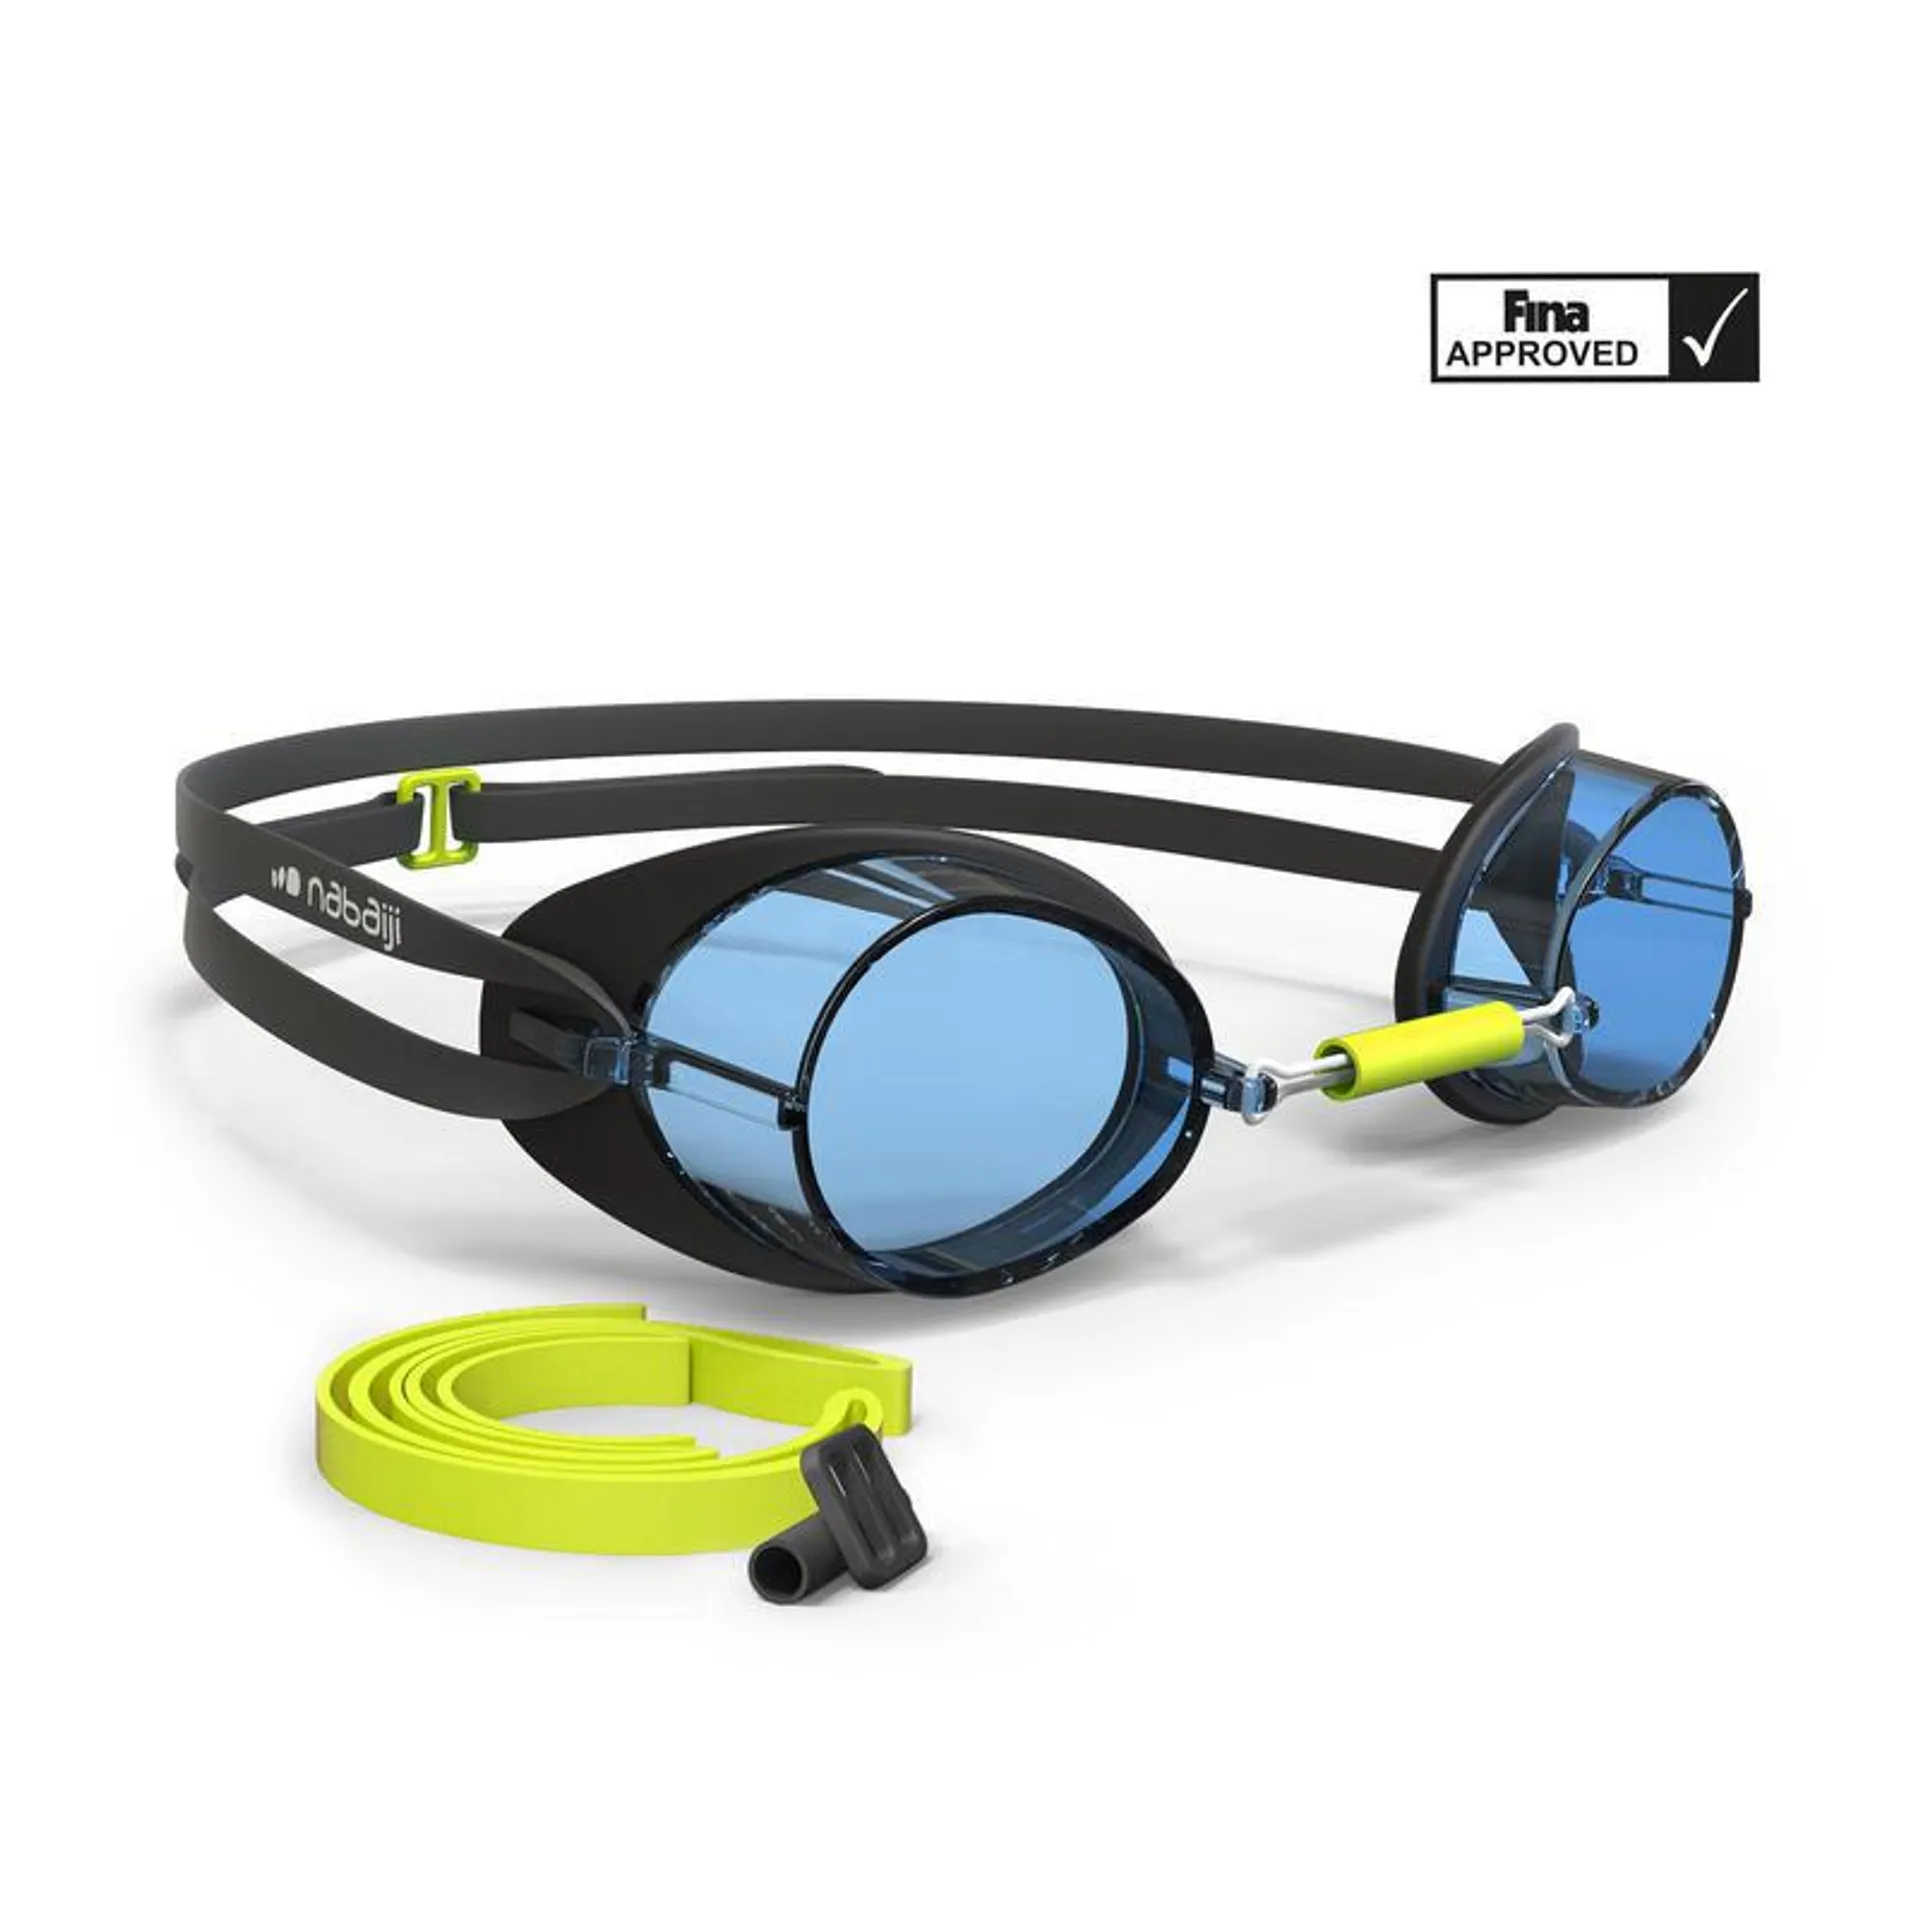 SWEDISH 900 SET ADULT SWIMMING GOGGLES CLEAR LENSES -BLACK YELLOW(FINA APPROVED)